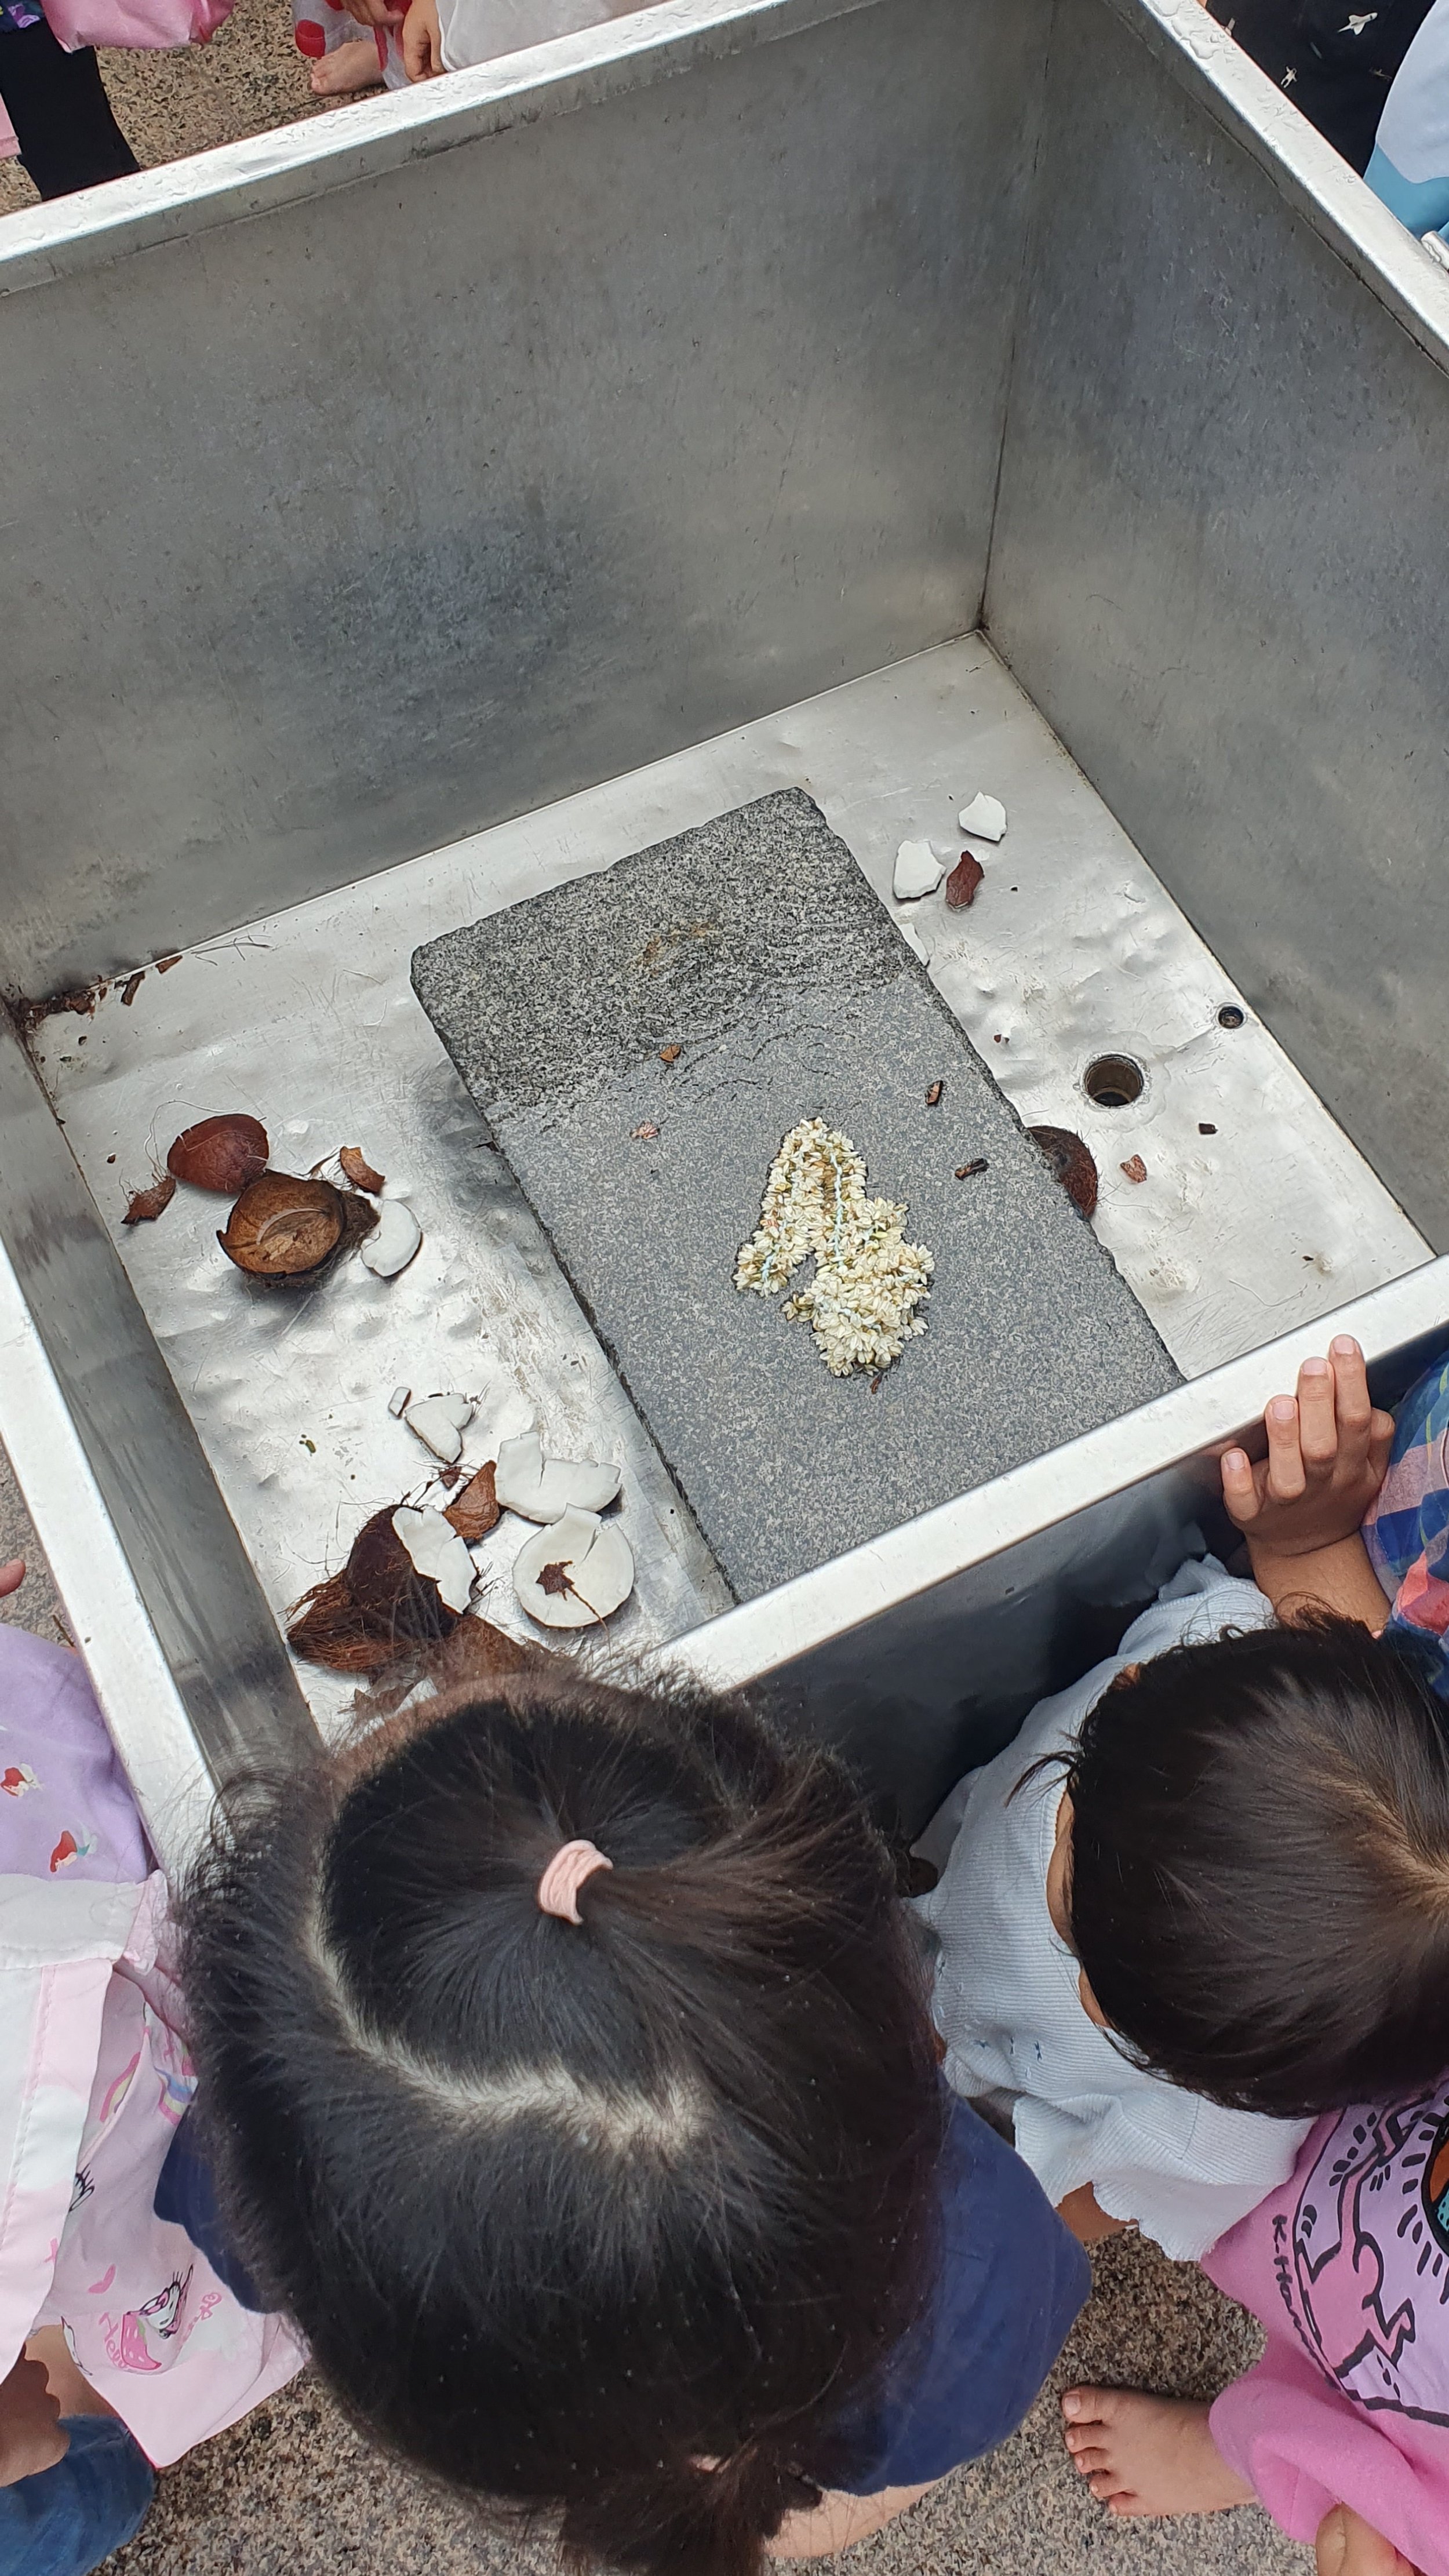  In this metal basin, there is a block of granite where worshippers smash a coconut as a prayer offering.   